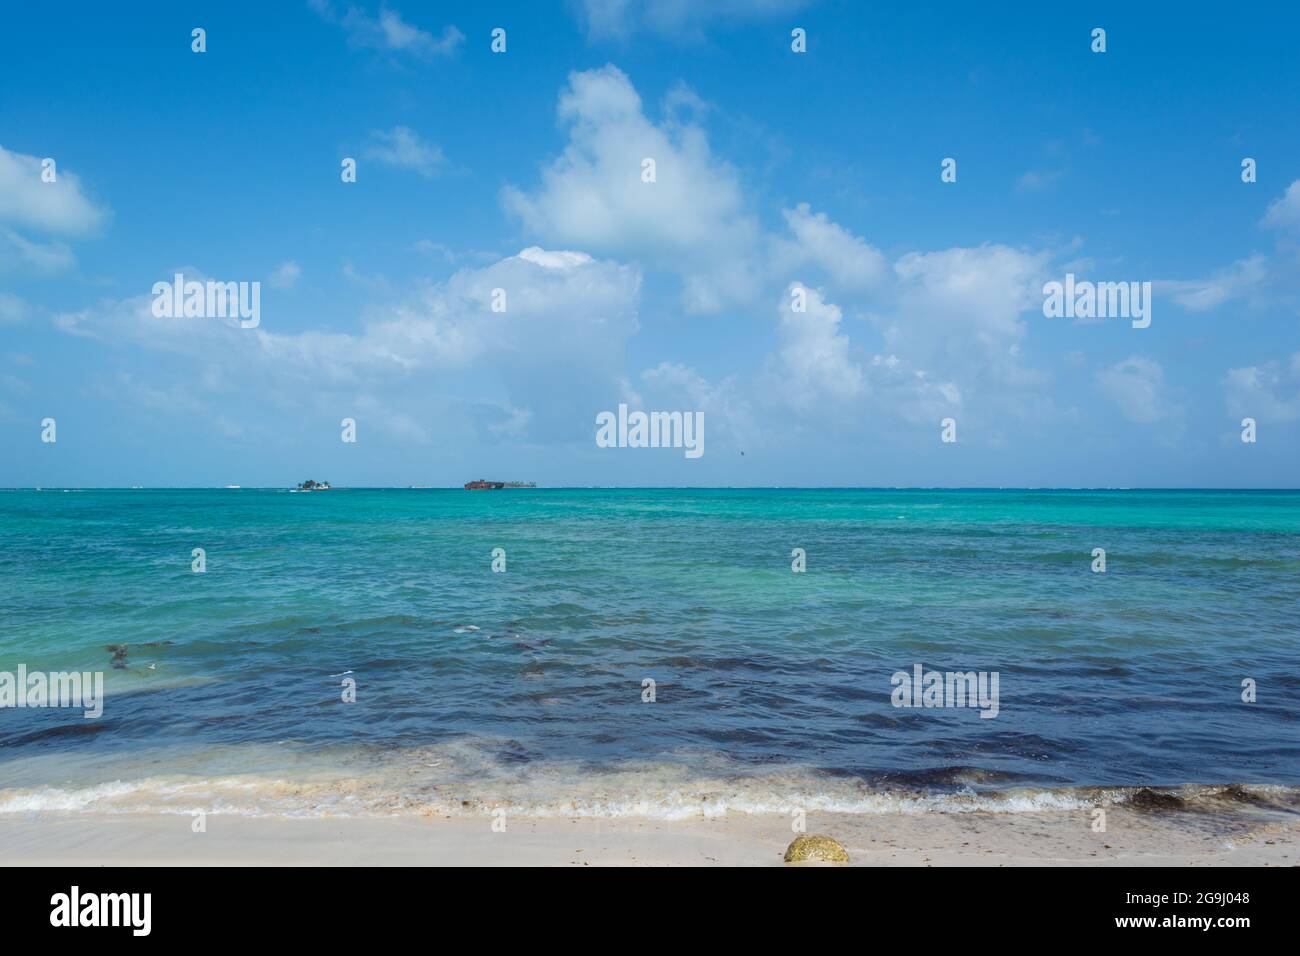 Sunny day by the beach at the island of San Andrés, Colombia. Blue skies and clear water. Stock Photo